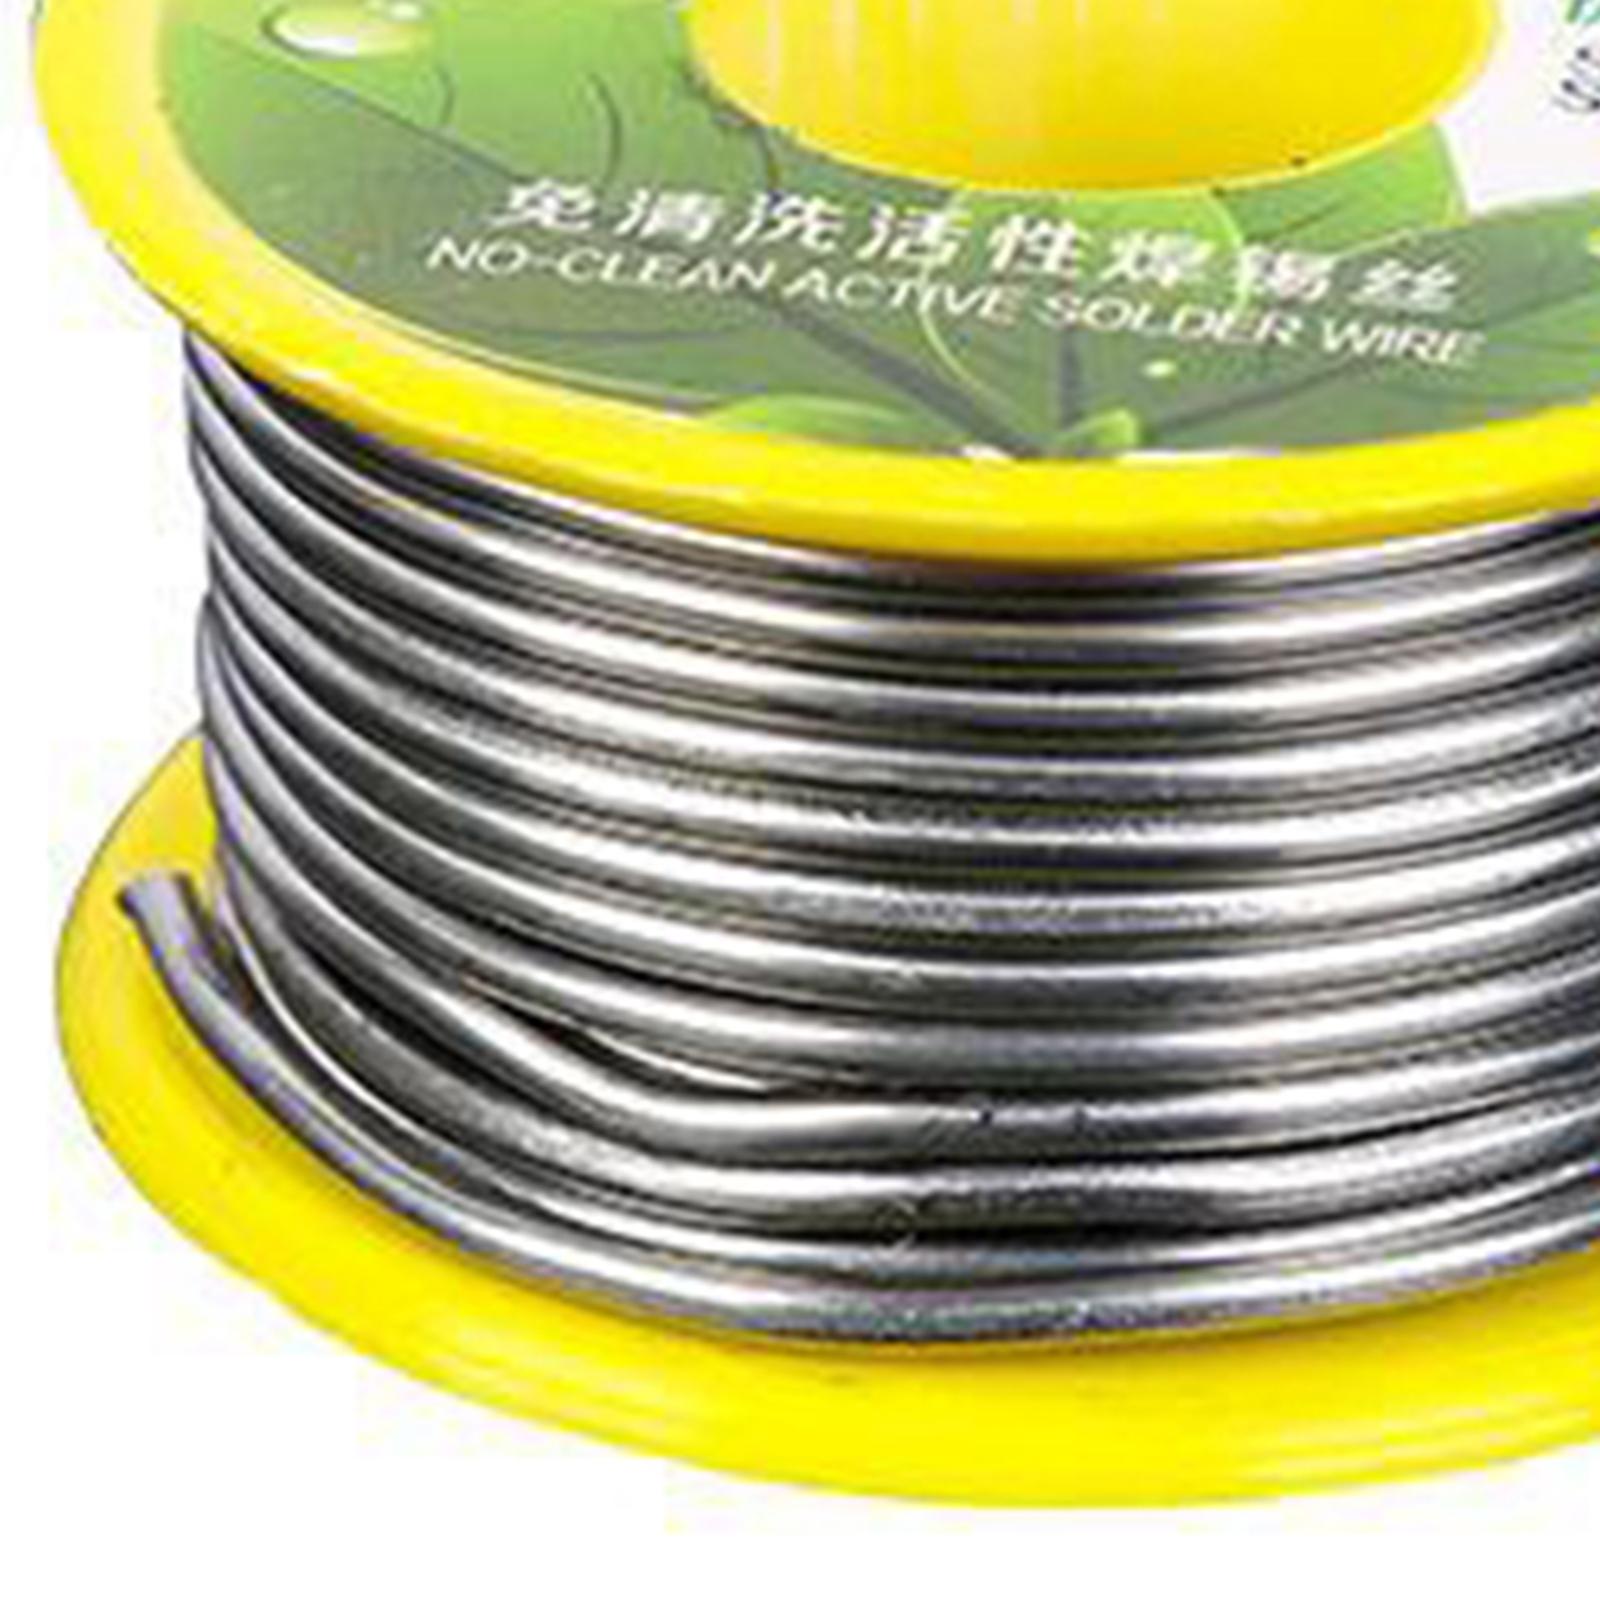 0.8mm 63/37 Tin Lead Rosin Core Solder Welding Wire for Electrical Soldering